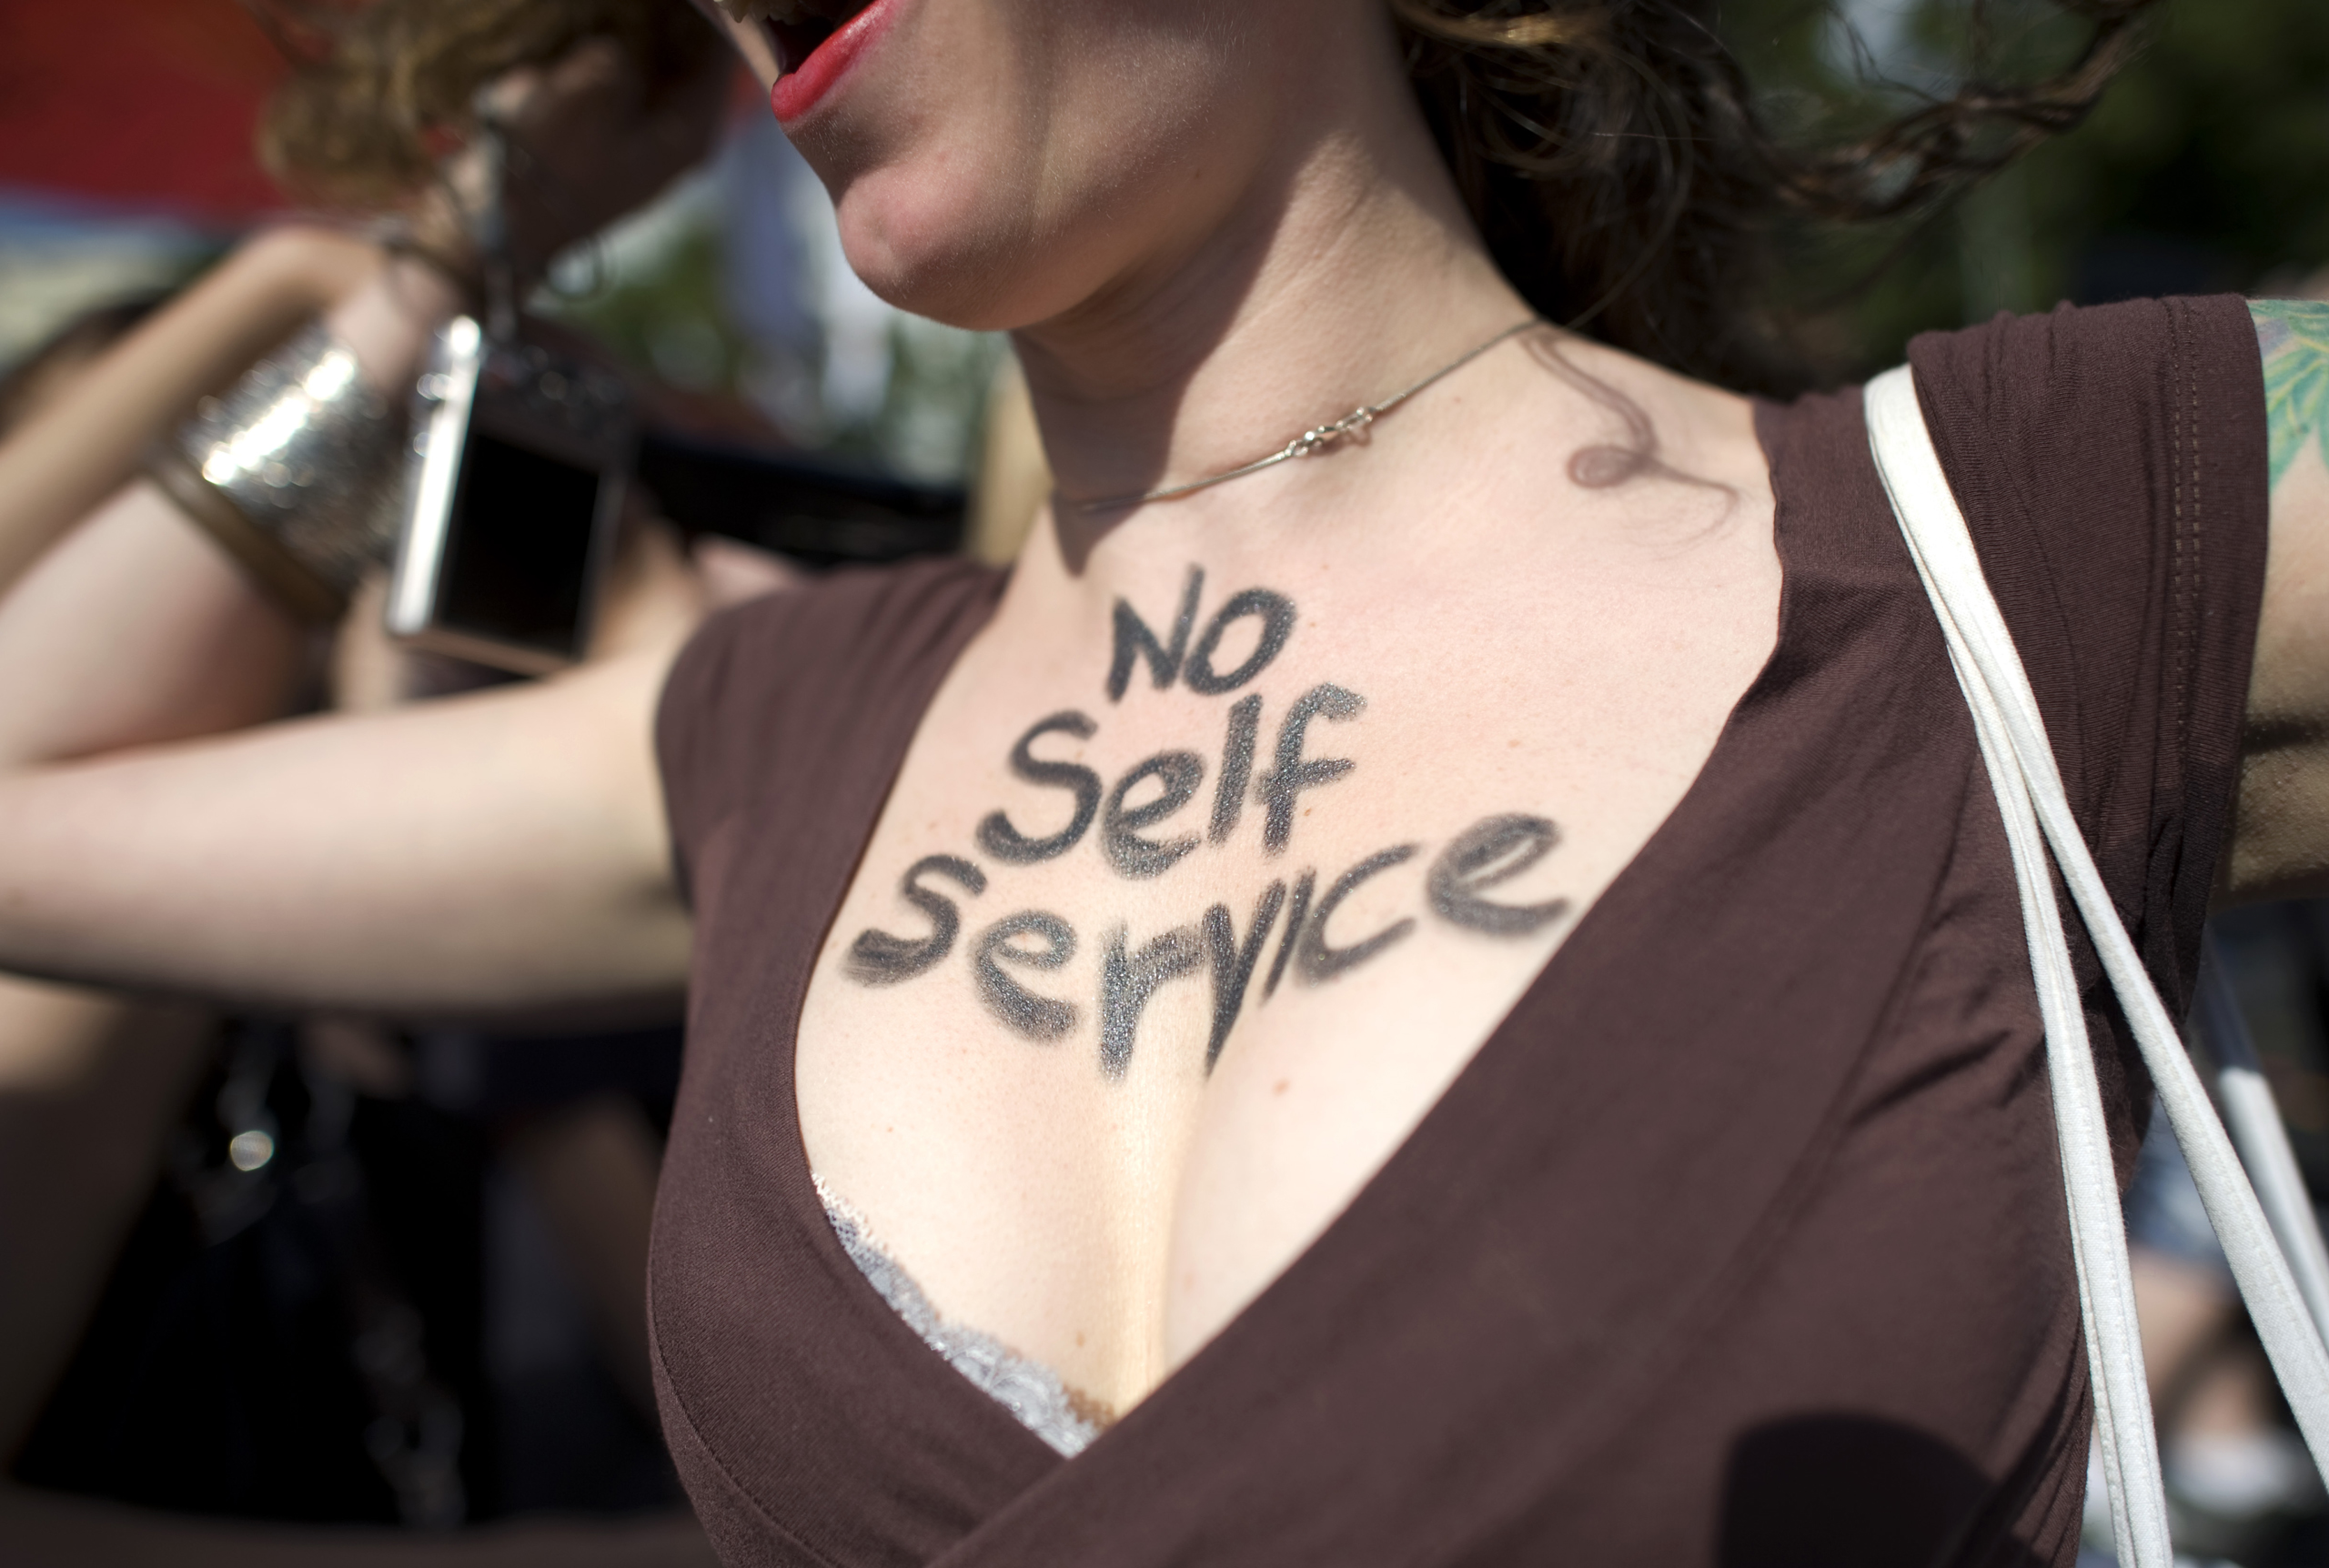 A women walks in a protest against sexual violence in Berlin, Germany on Aug. 8, 2011. (Ullstein Bild—Getty Images)